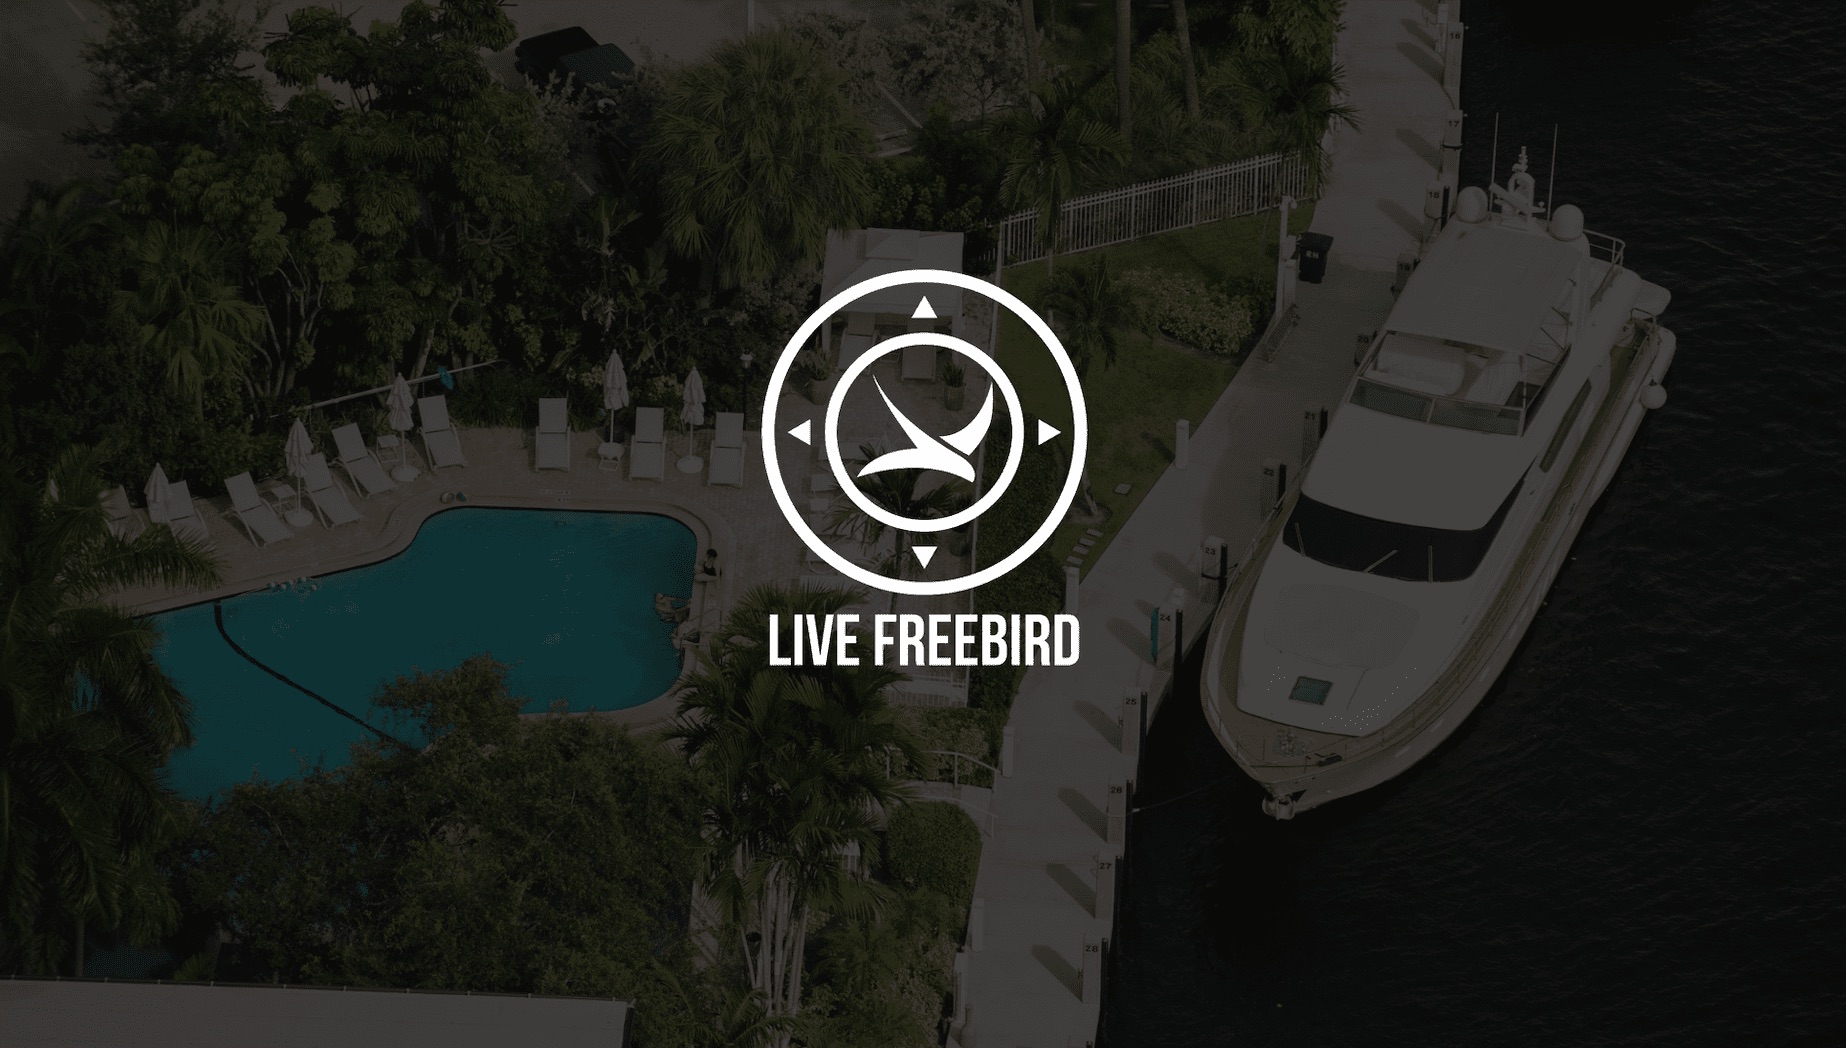 IU seo copywriting services White Live Freebird logo with dimmed background of a yacht by a dock and pool